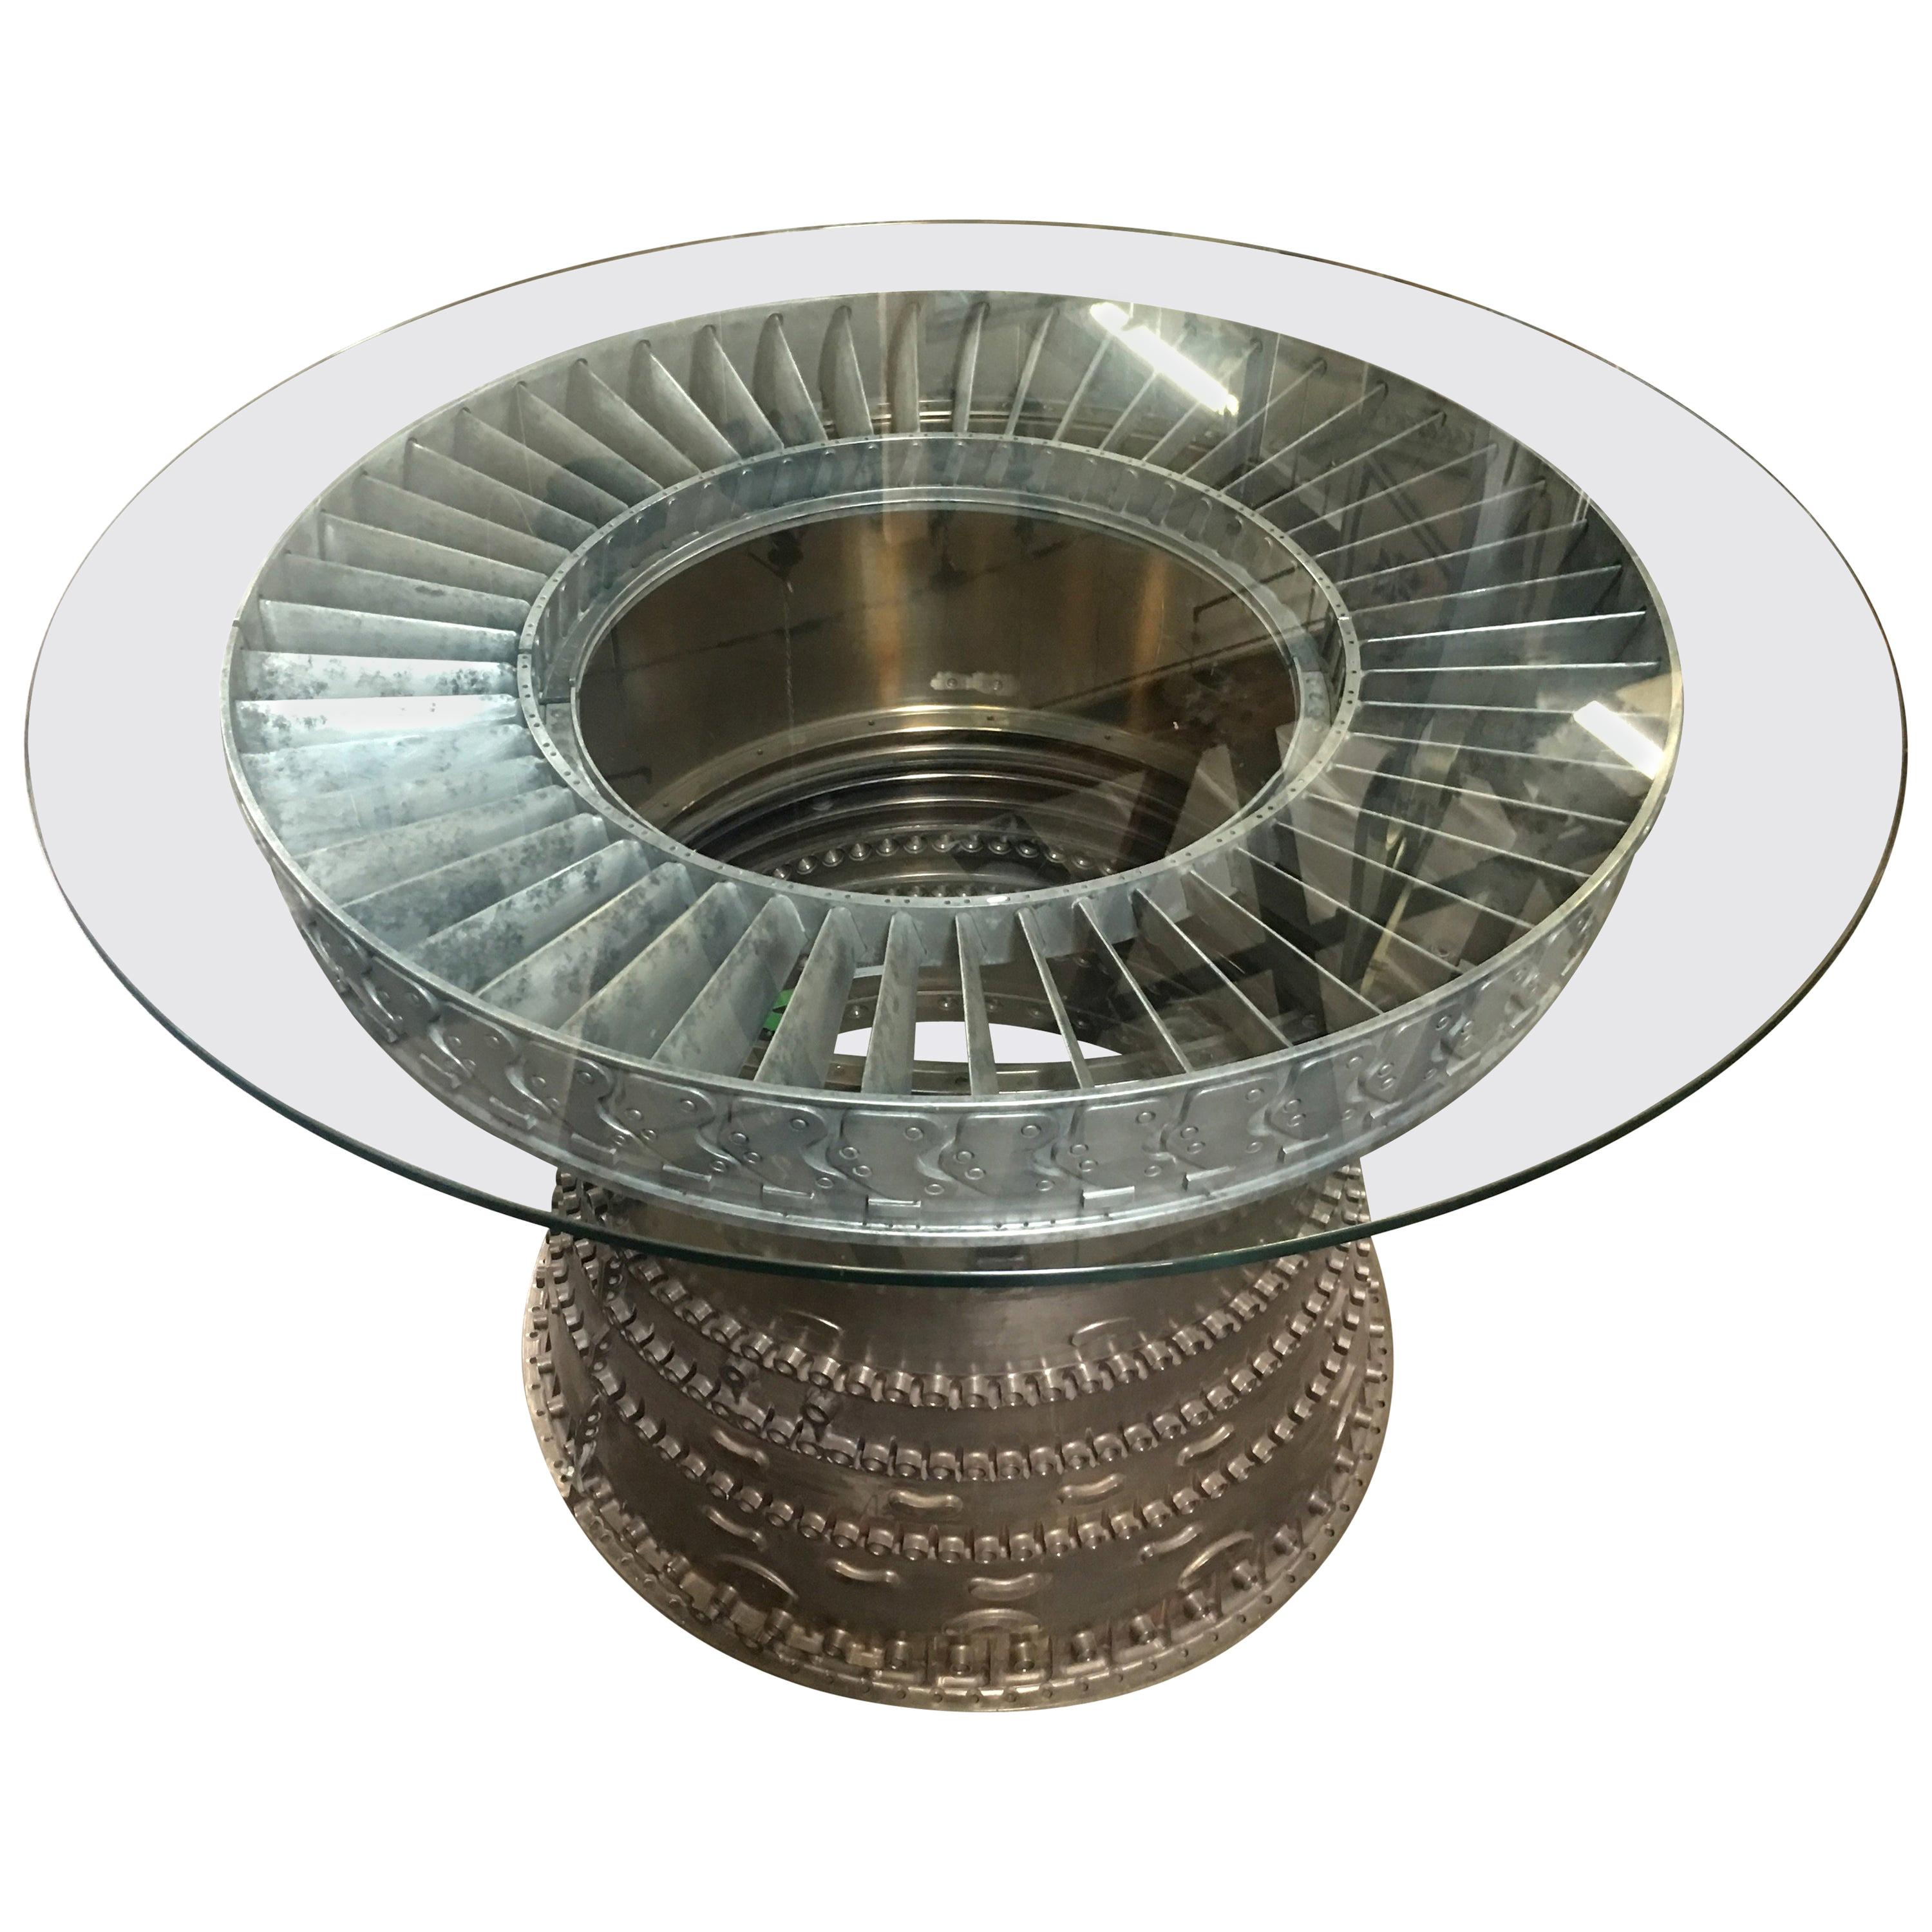 Brutalist Style Titanium Jet Turbine Sculptural Dining Table with Glass Top